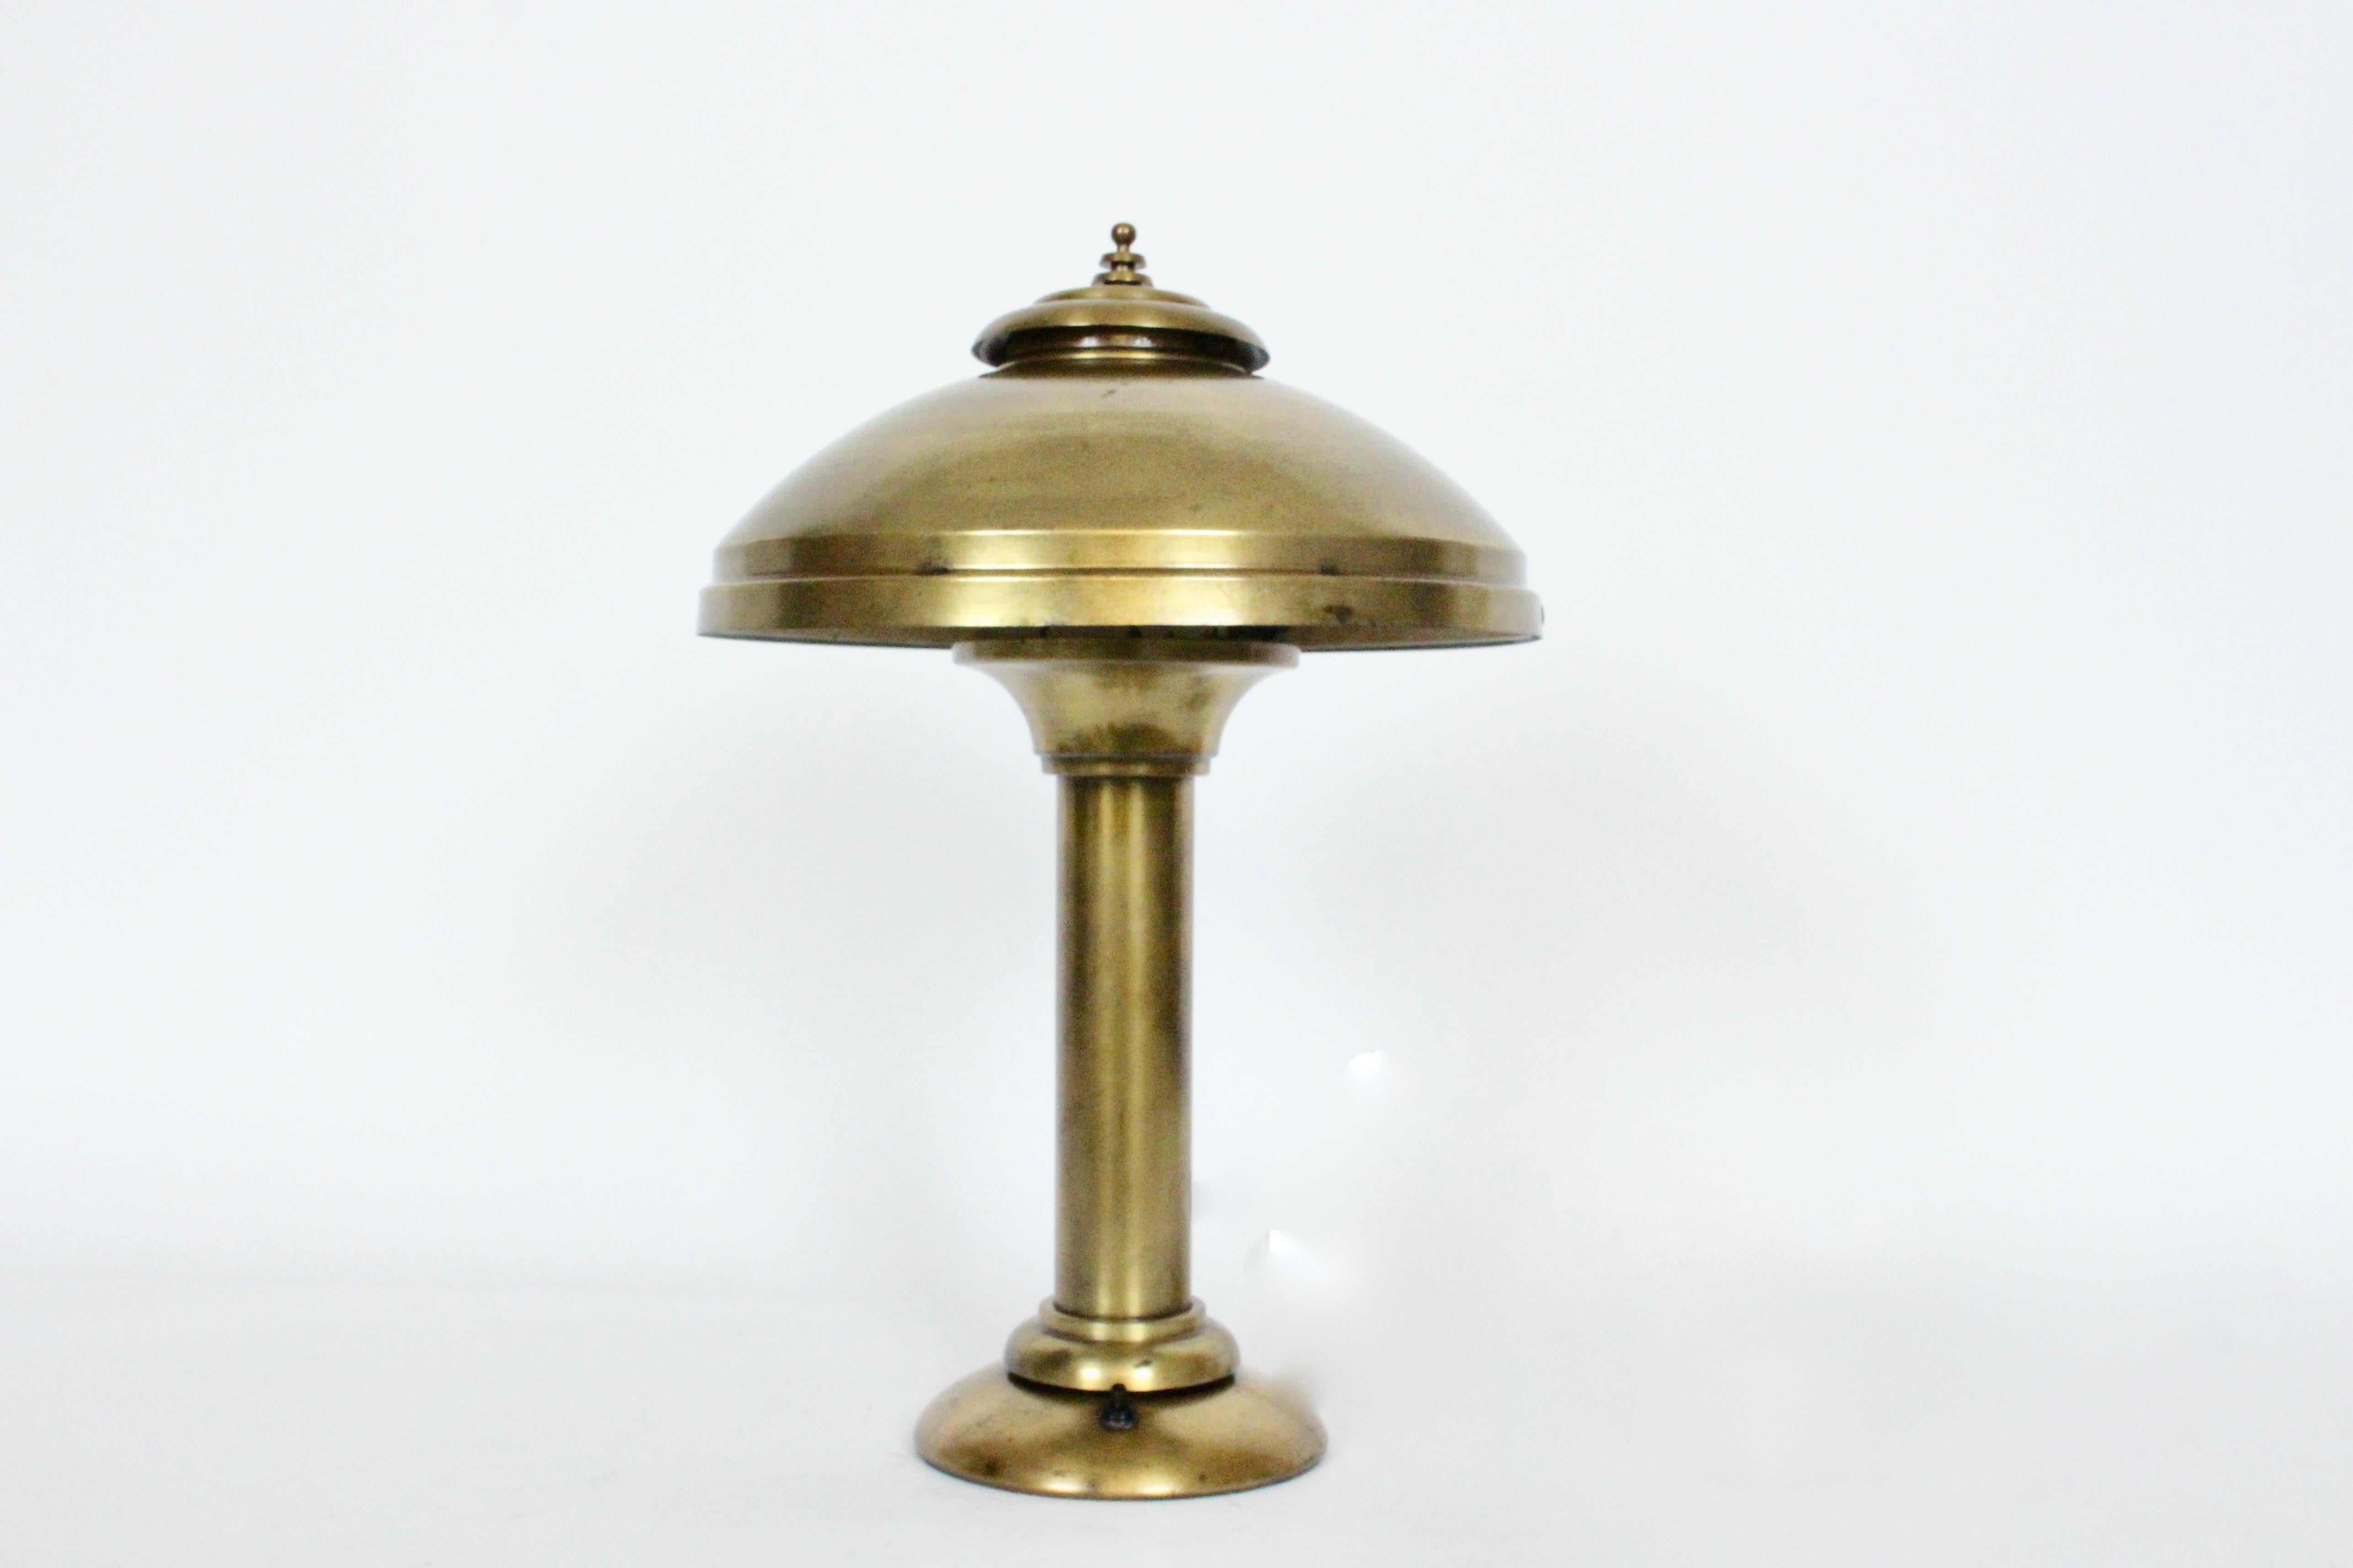 Fairies Mfg. Co. Cantilever All Brass Shaded Desk Lamp, 1920s For Sale 13